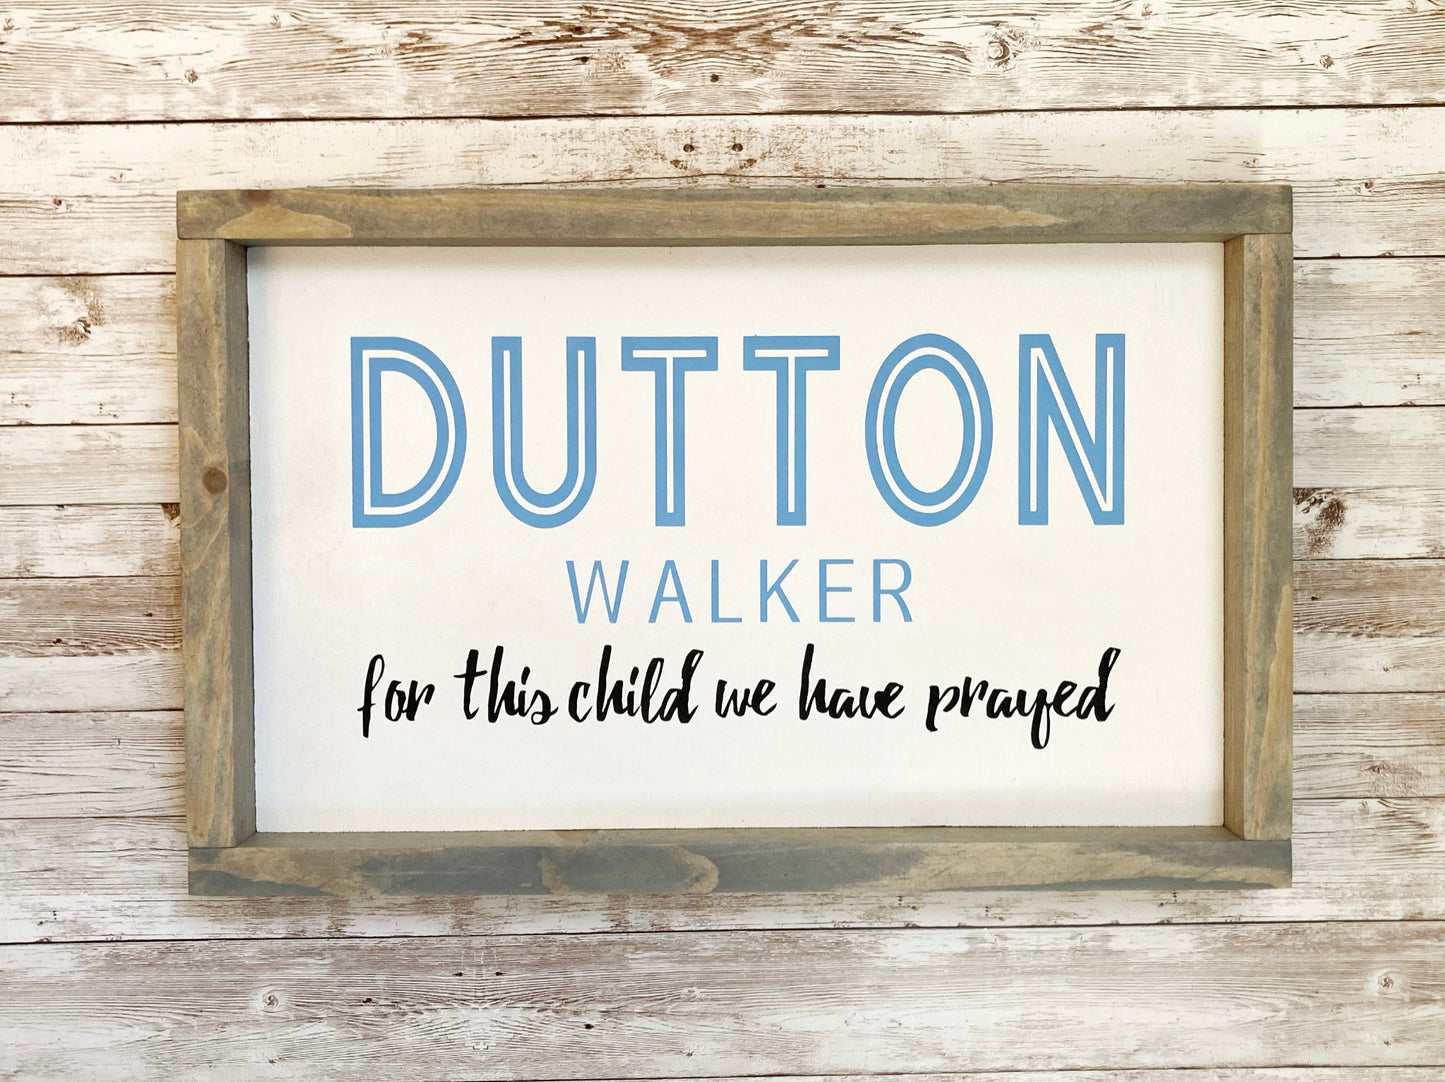 Personalized Nursery Name Wood Sign for a Boy or Girl